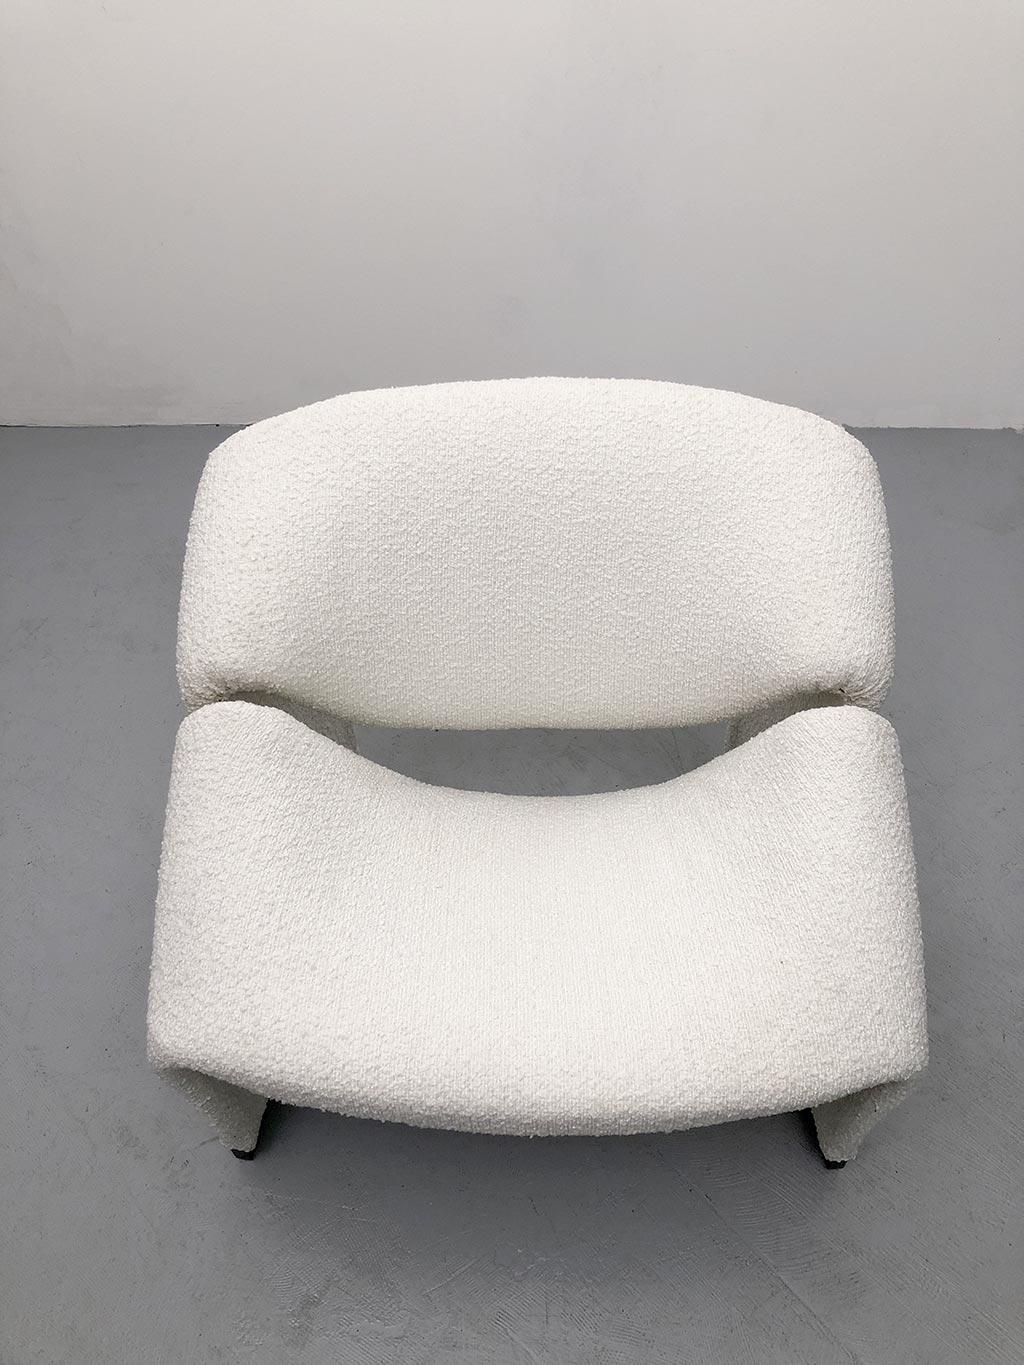 Late 20th Century F580 Groovy Lounge Chair by Pierre Paulin for Artifort, first edition 1966 For Sale